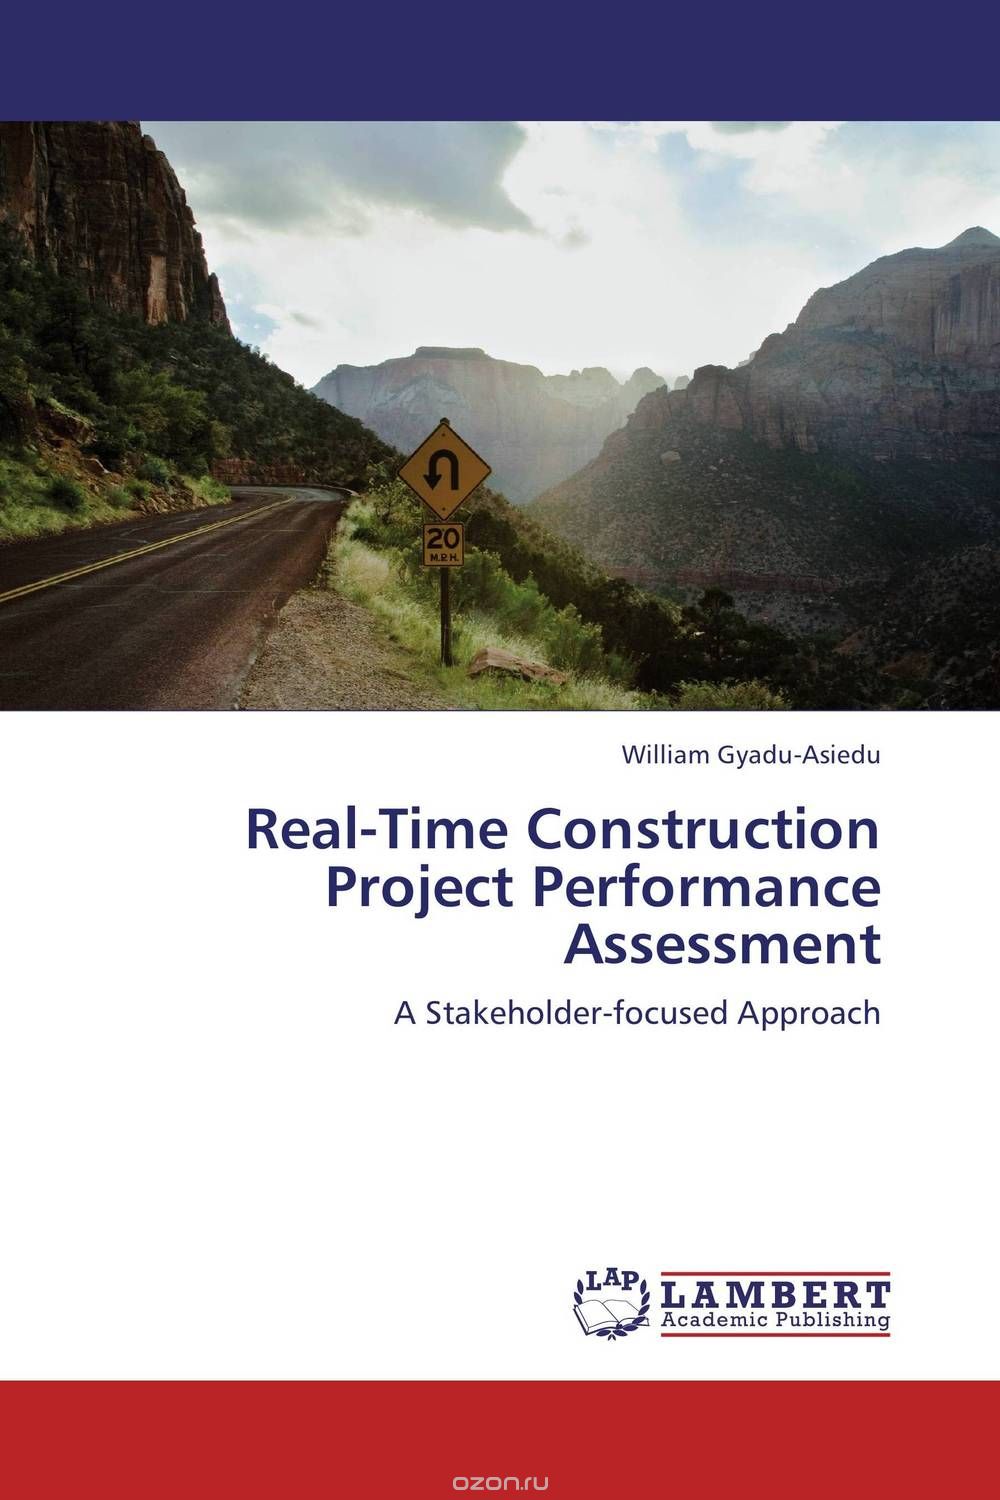 Real-Time Construction Project Performance Assessment